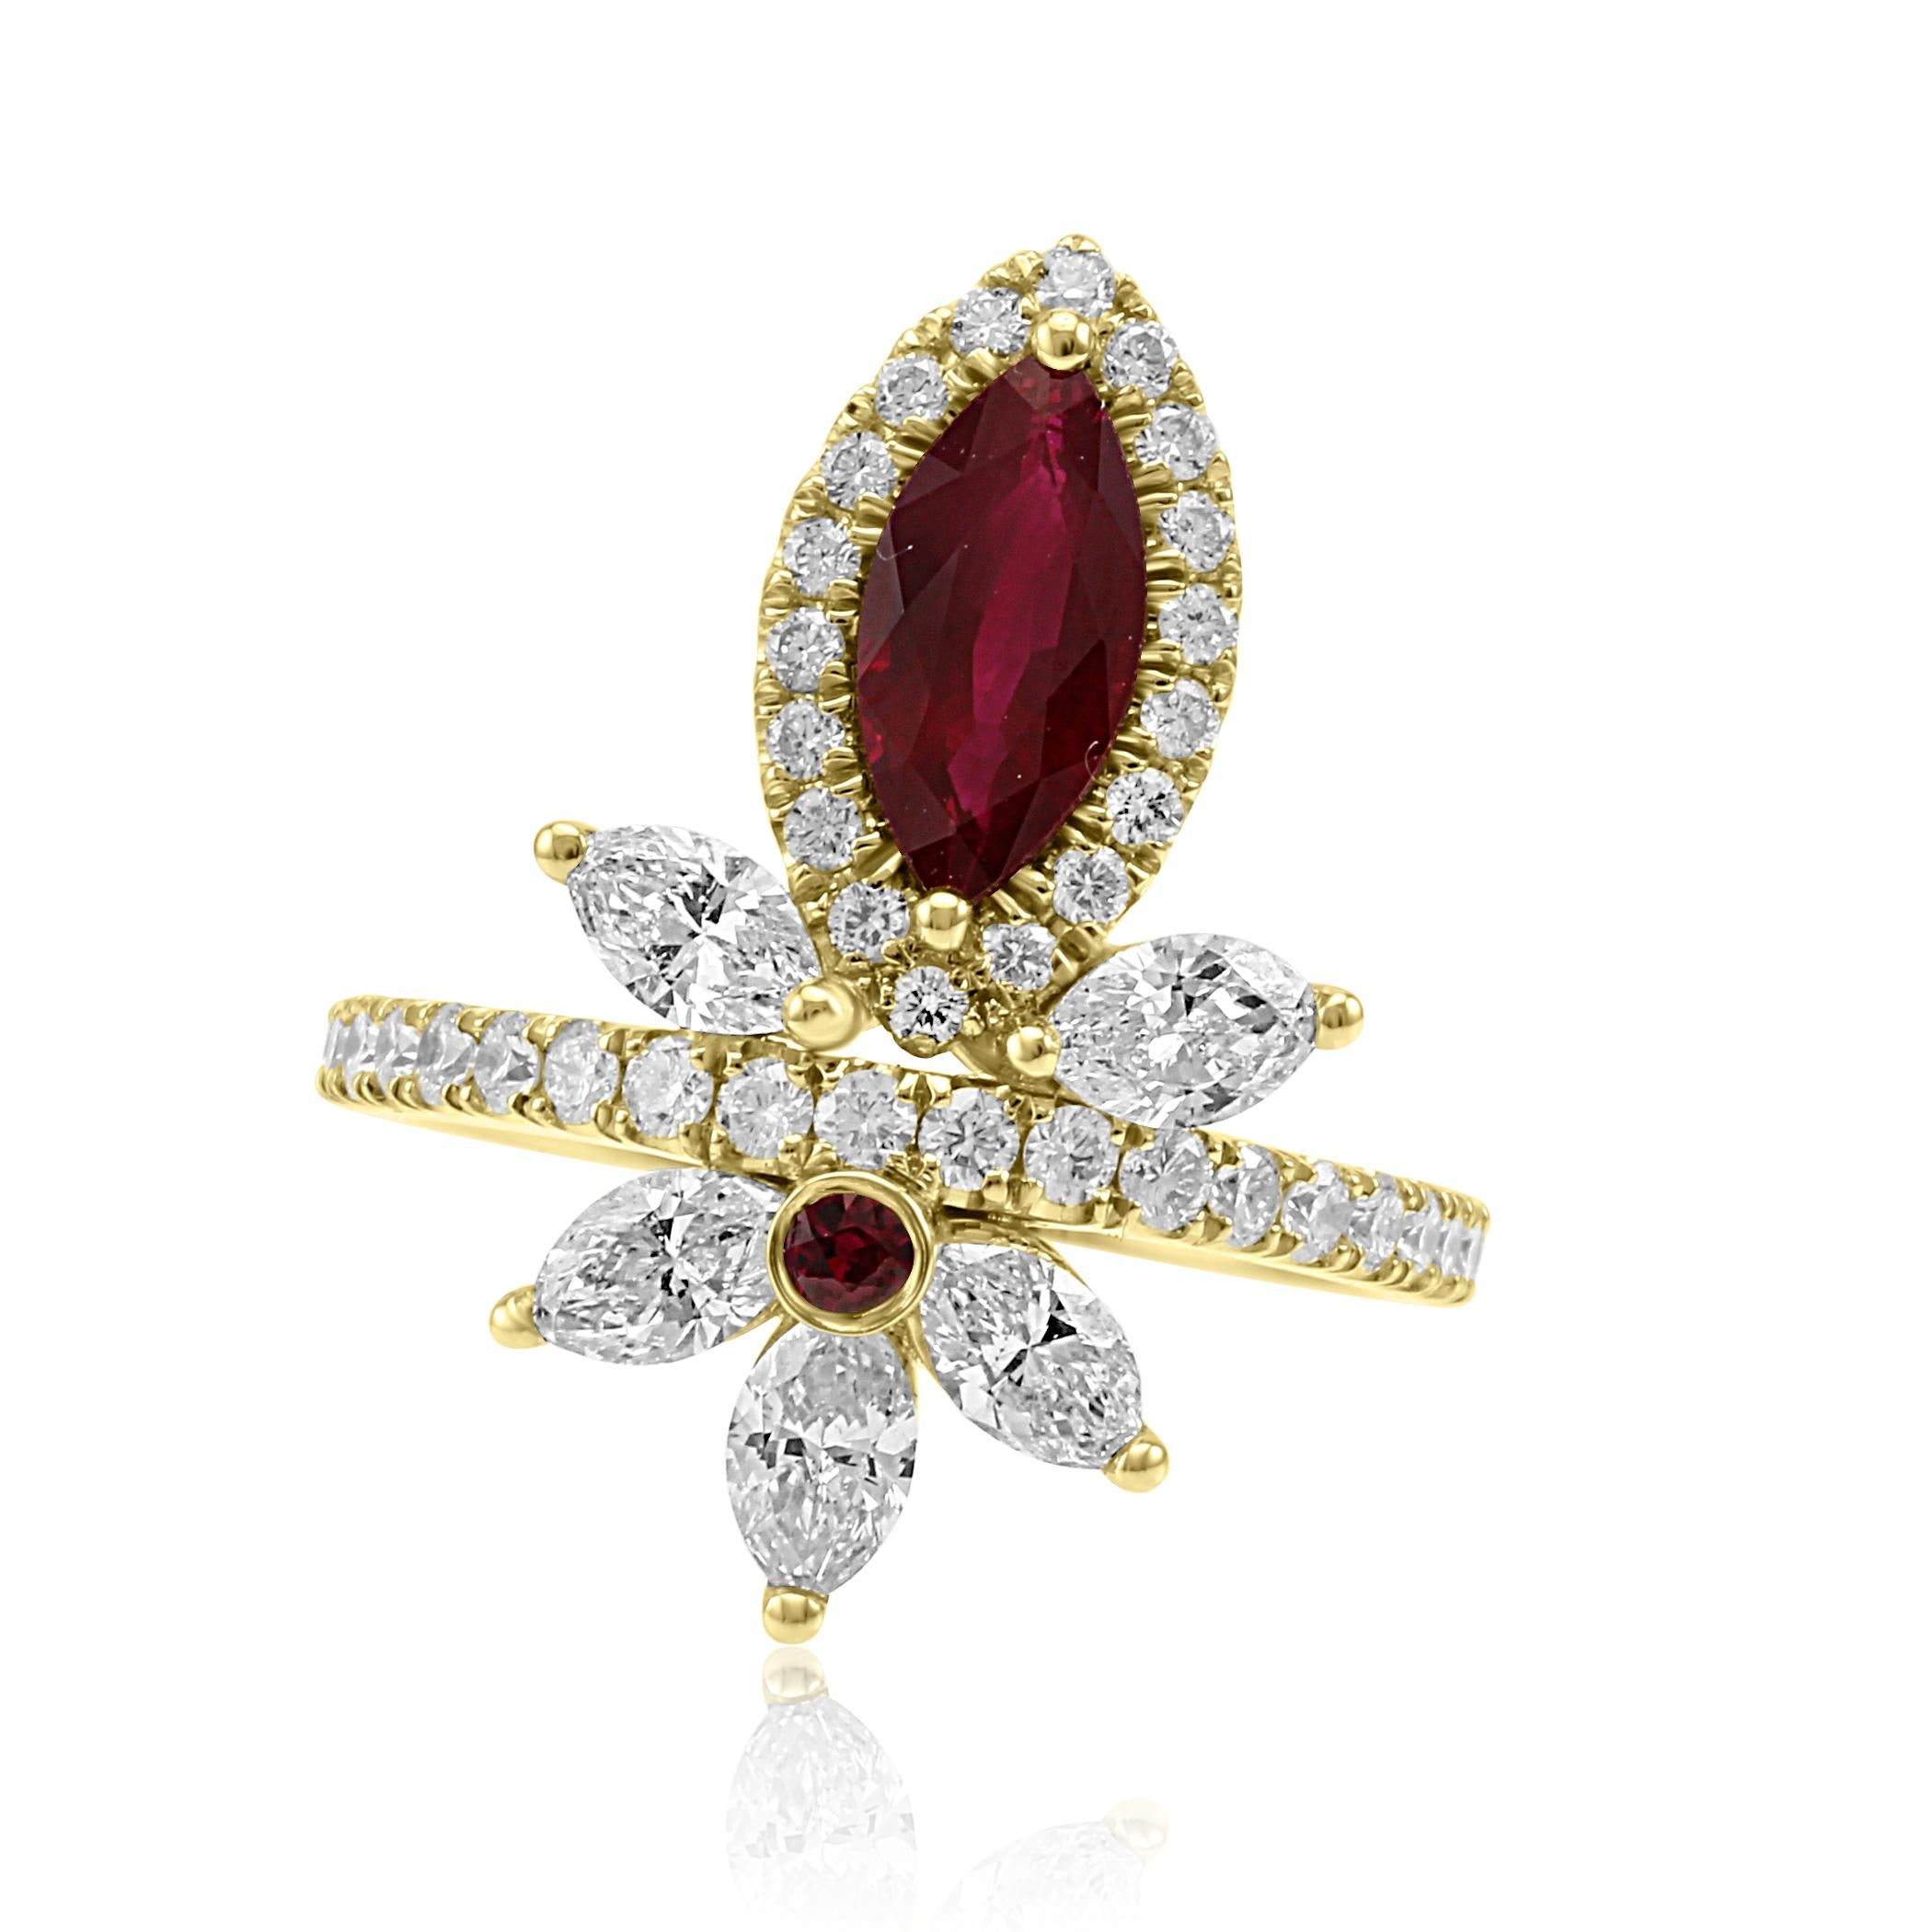 Gorgeous Ruby Marquise 1.17 Carat encircled in a halo of Colorless VS-SI Diamonds 0.79 carat set with 5 Colorless SI Diamond Marquises 1.00 Carat and Ruby Round 0.05 Carat in 18K Yellow Gold One of a Kind Fashion Cocktail Ring. 3.01 Carat total